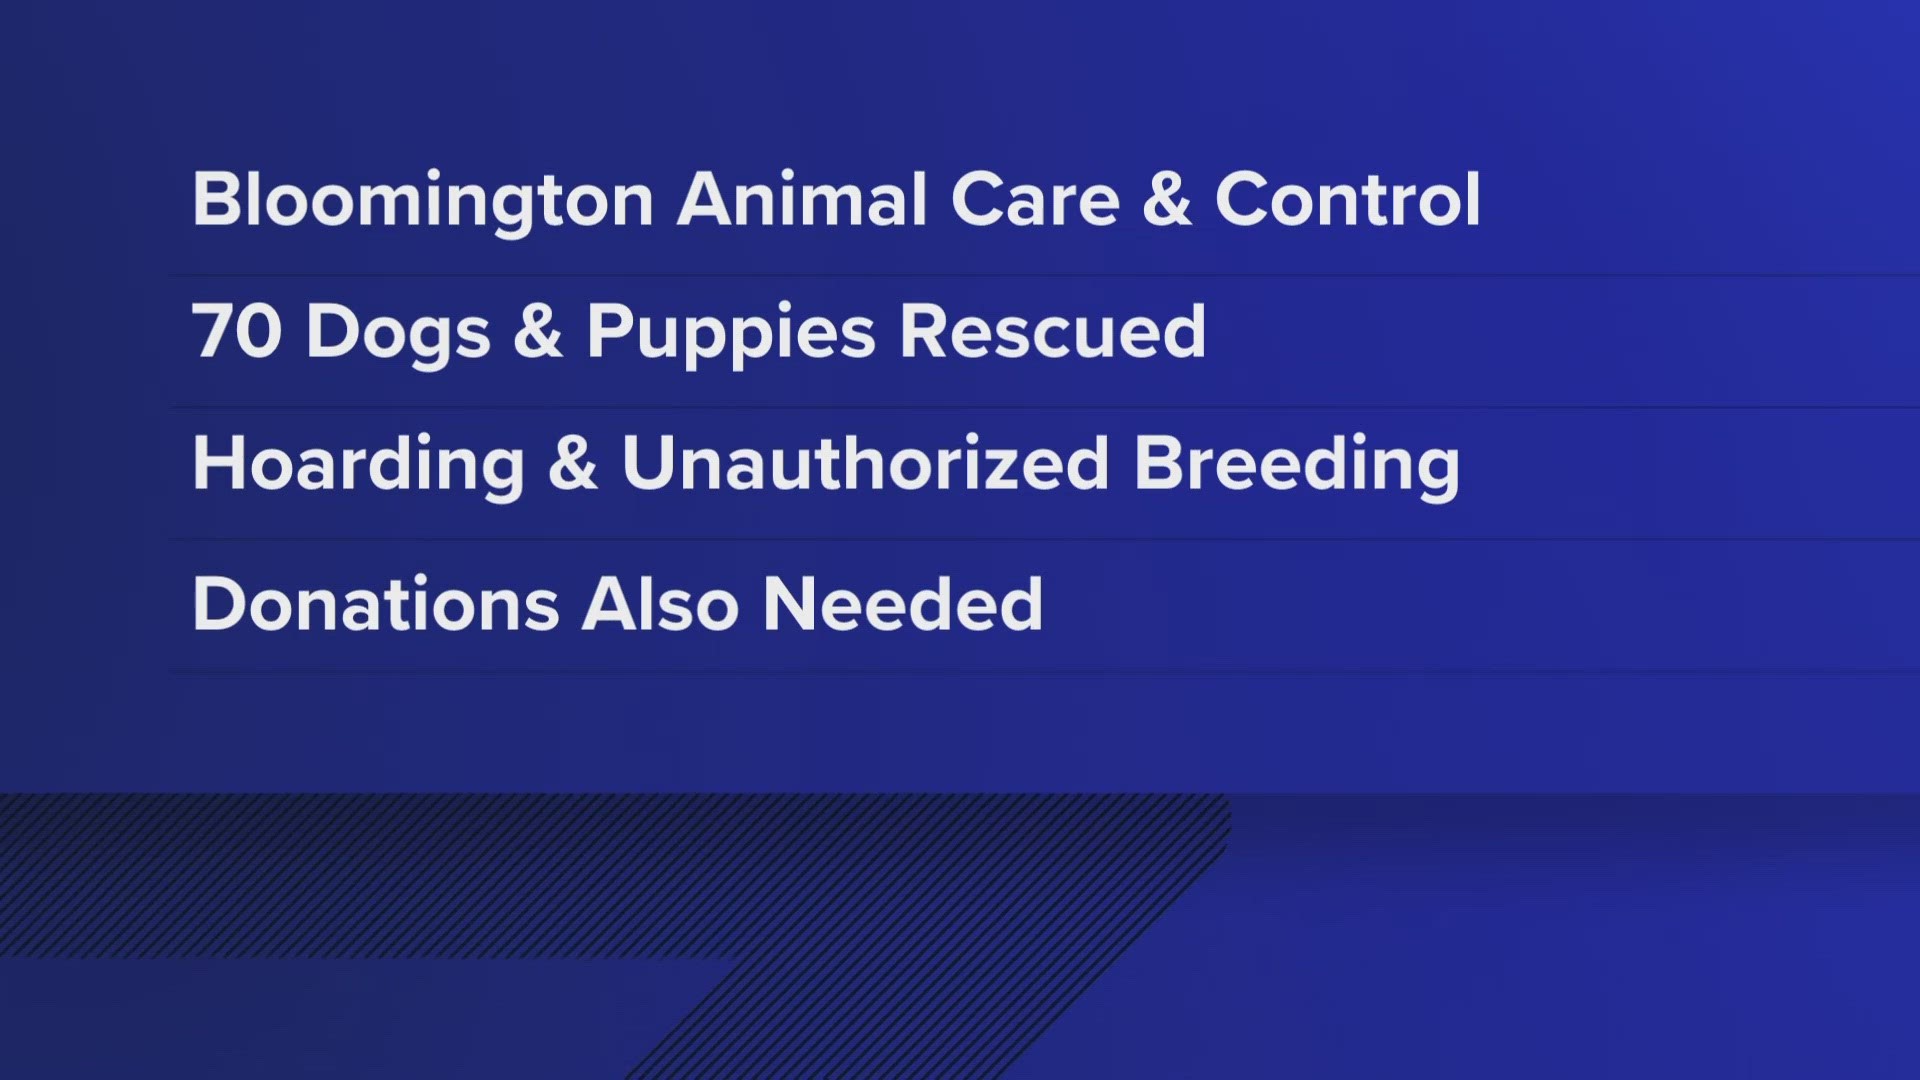 The dogs were seized Friday by the City of Bloomington Animal Care and Control.